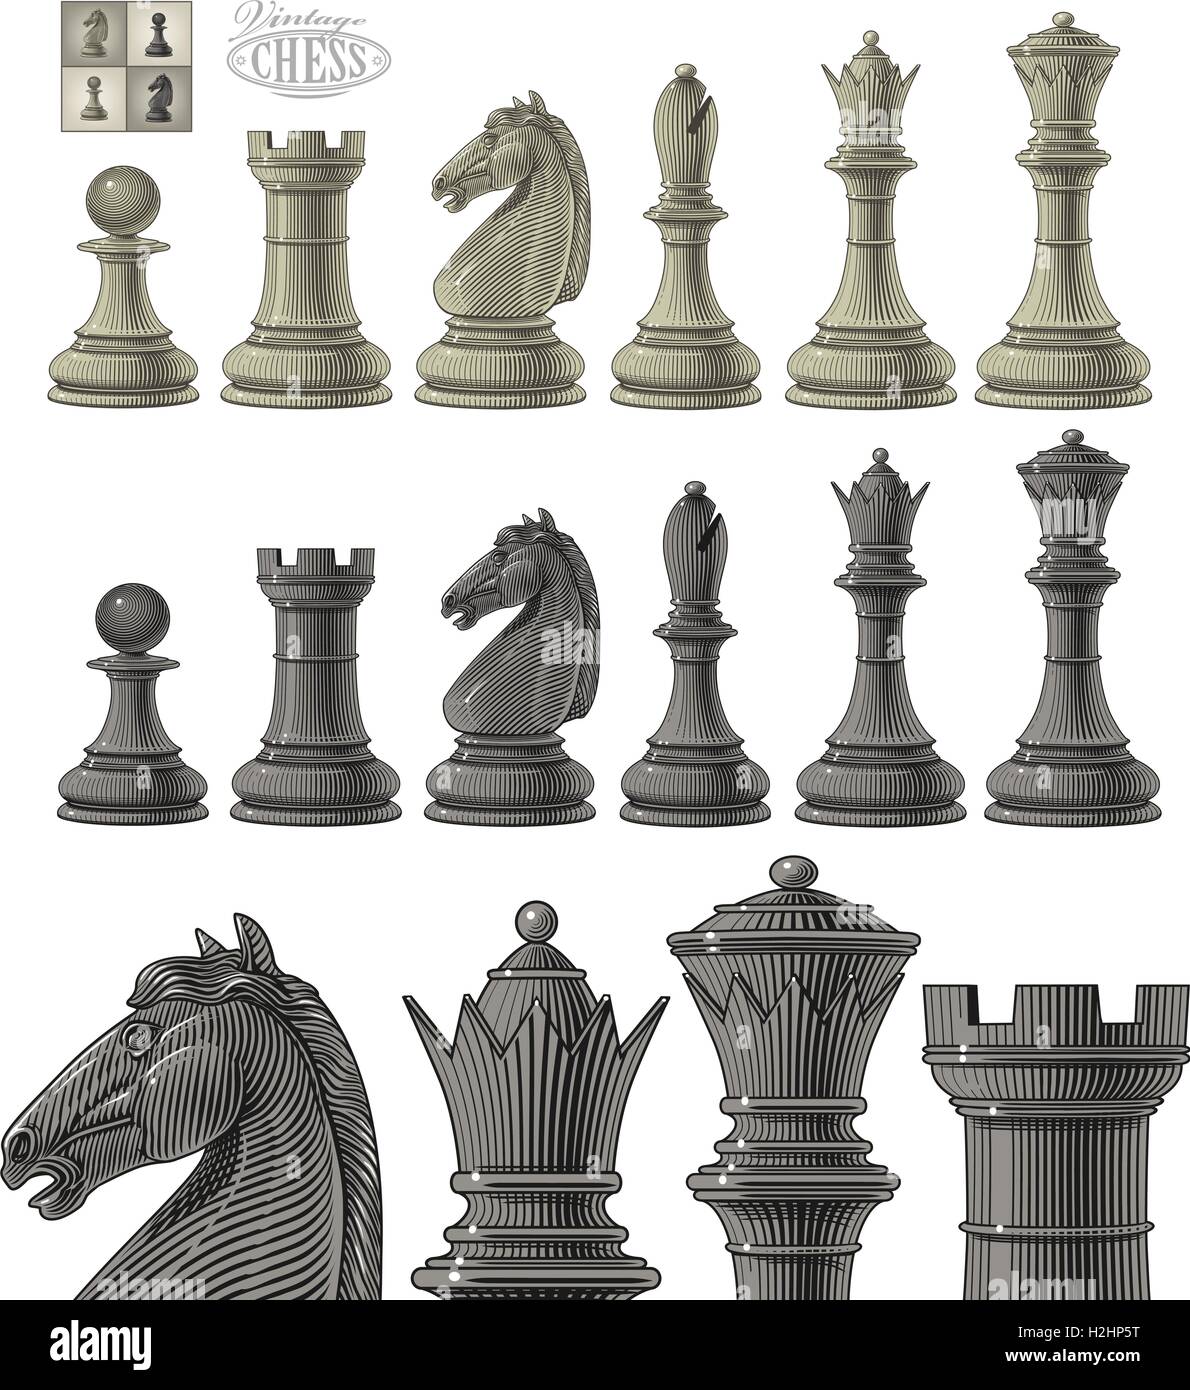 Vector illustration of chess piece set in vintage engraving style, isolated, grouped on transparent background Stock Vector